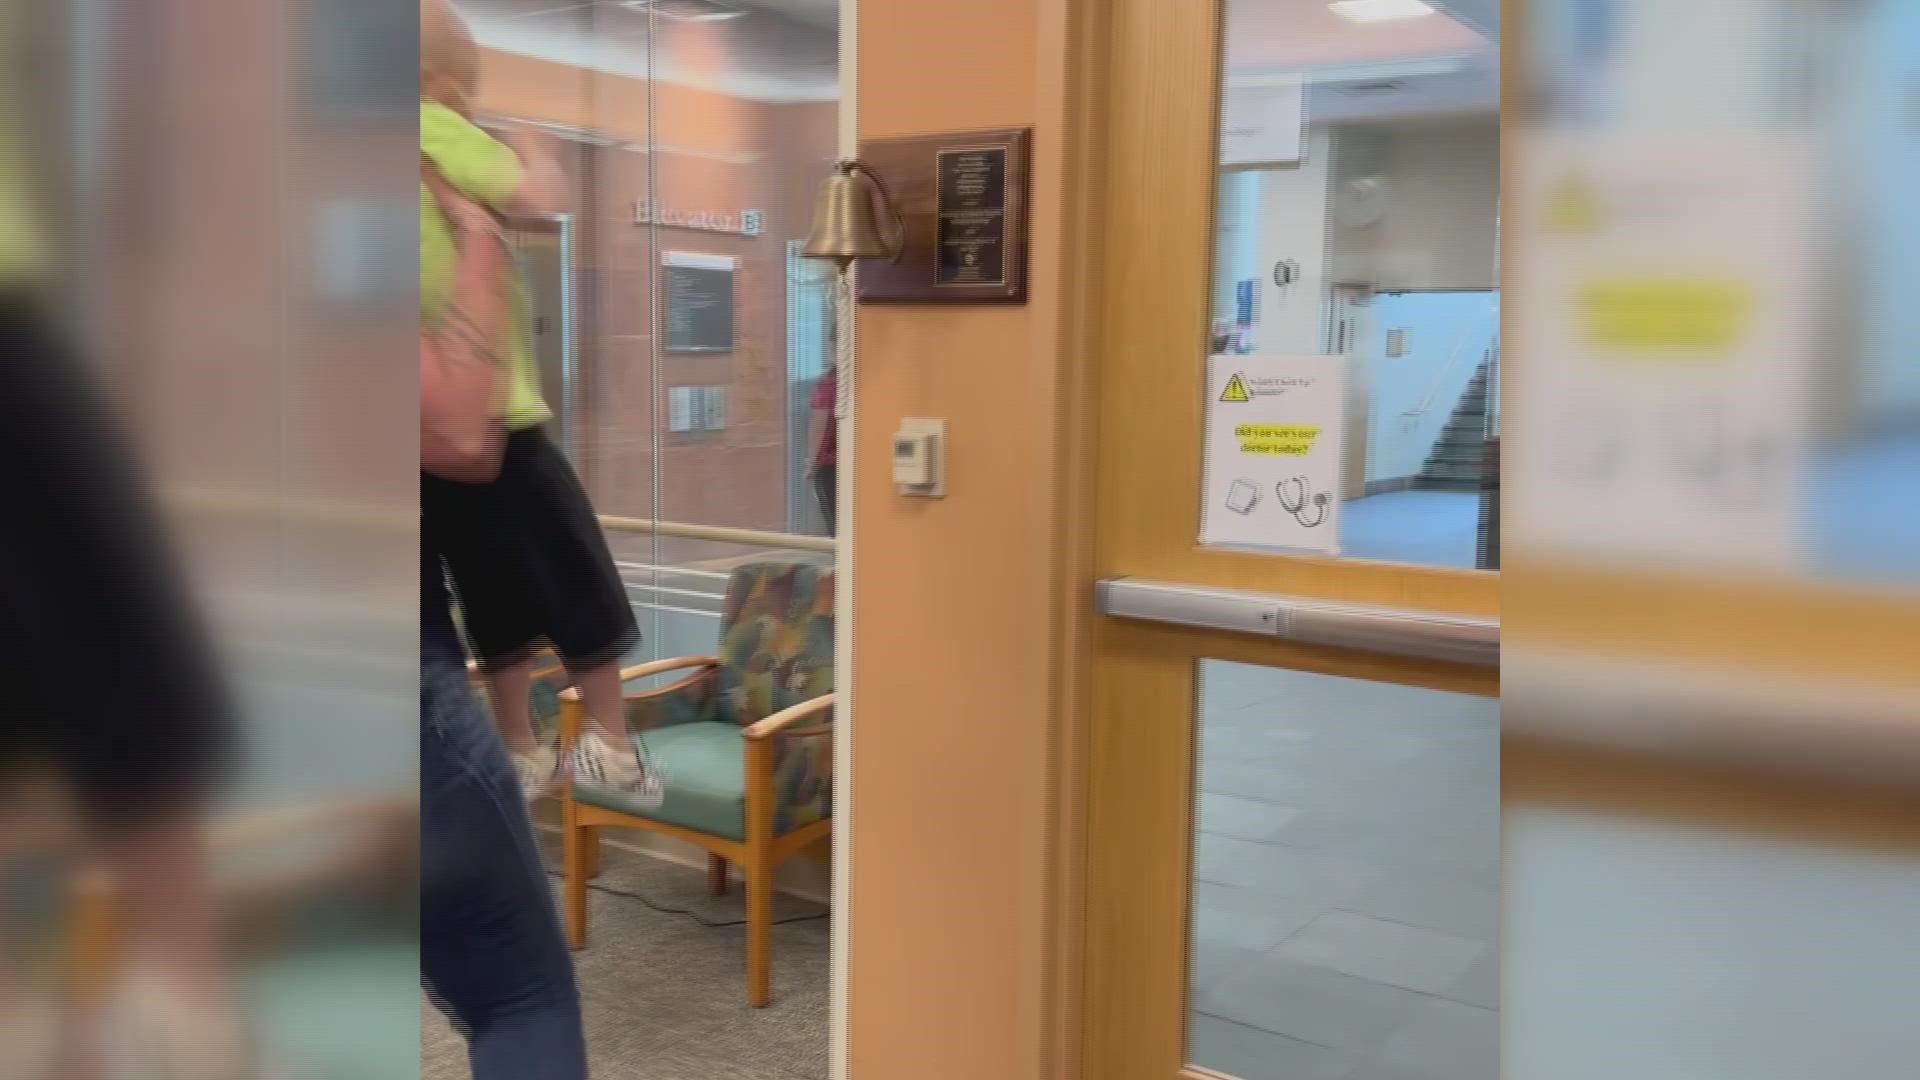 Three-year-old Bodie celebrates his last chemotherapy treatment and rings the bell.